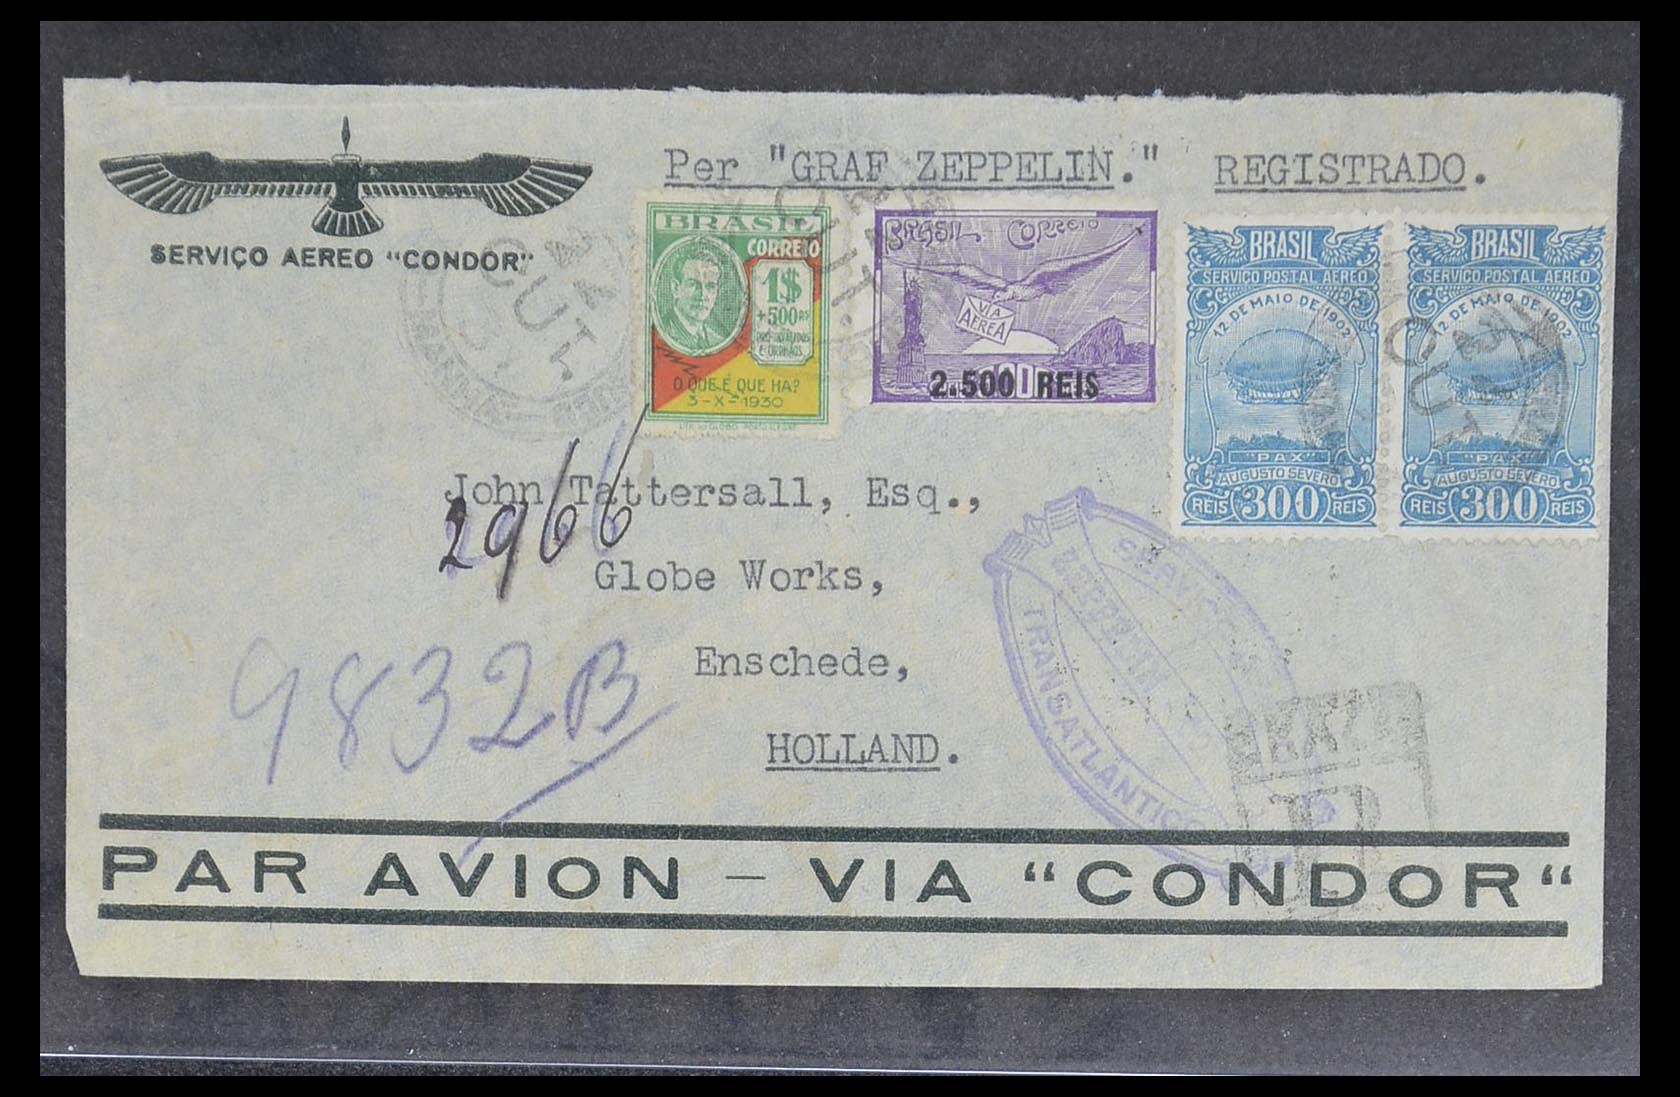 33331 027 - Stamp collection 33331 Zeppelin covers 1929-1931.